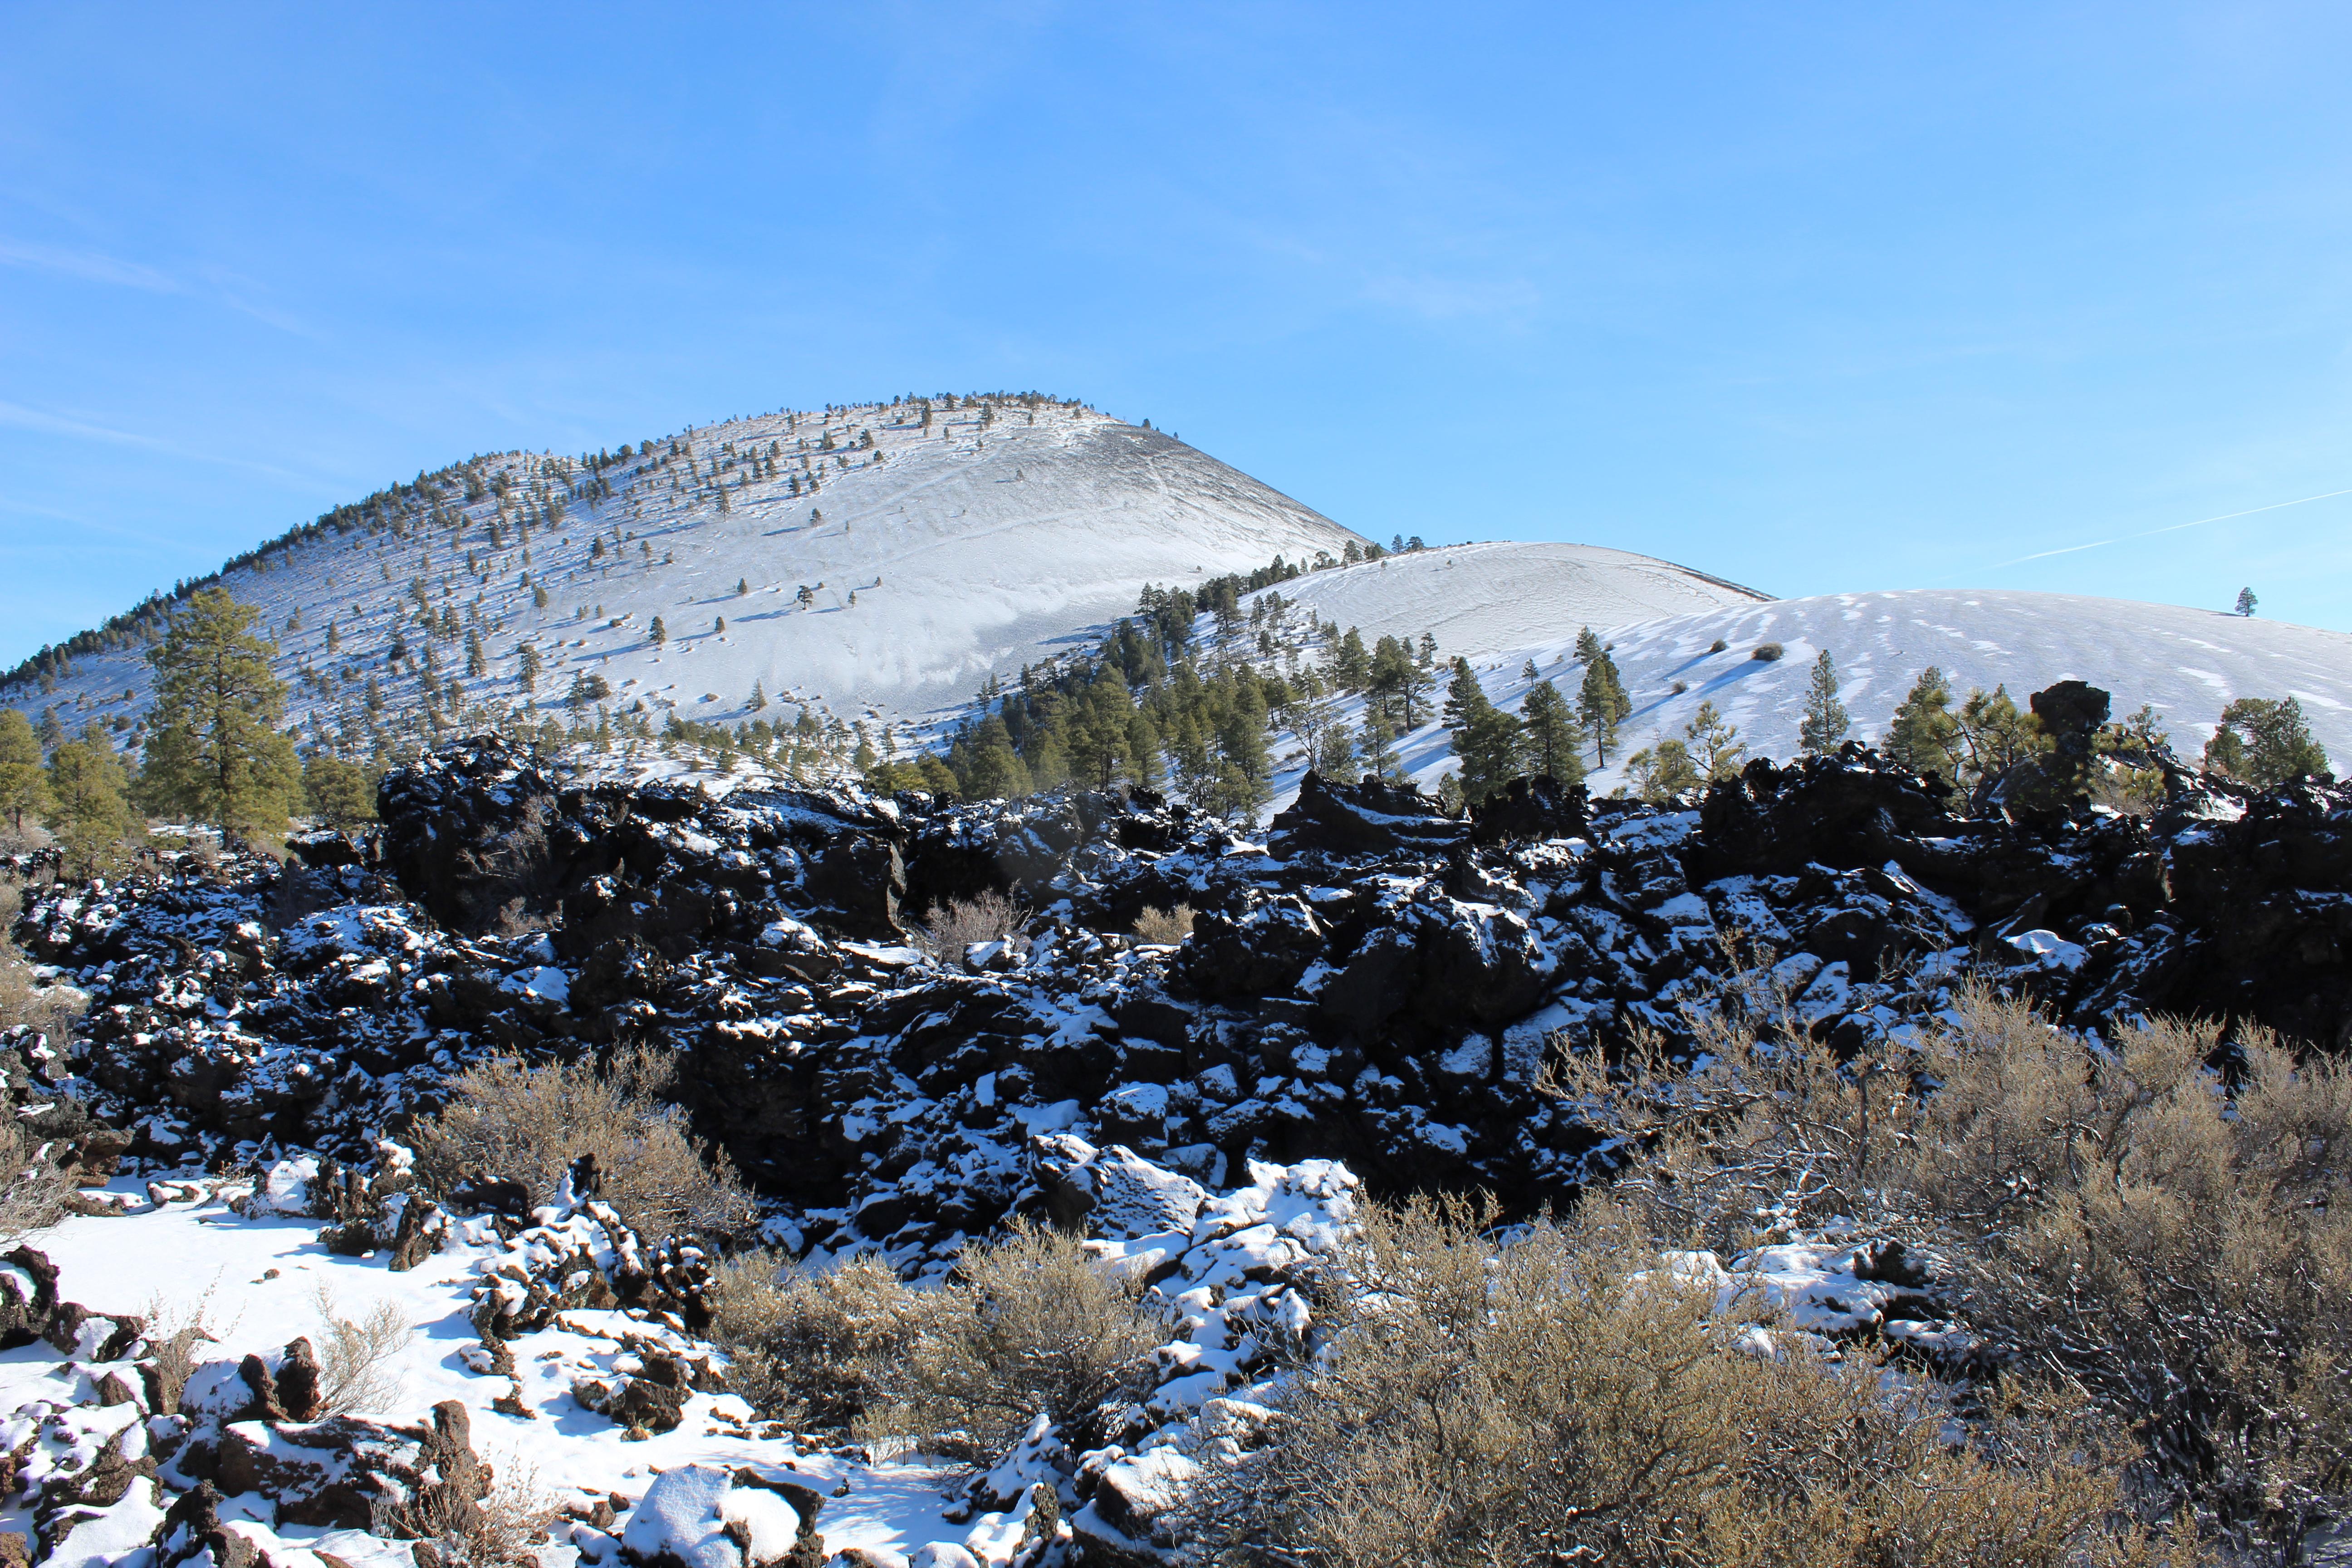 A snow-covered cinder cone and lava flow under a clear blue sky